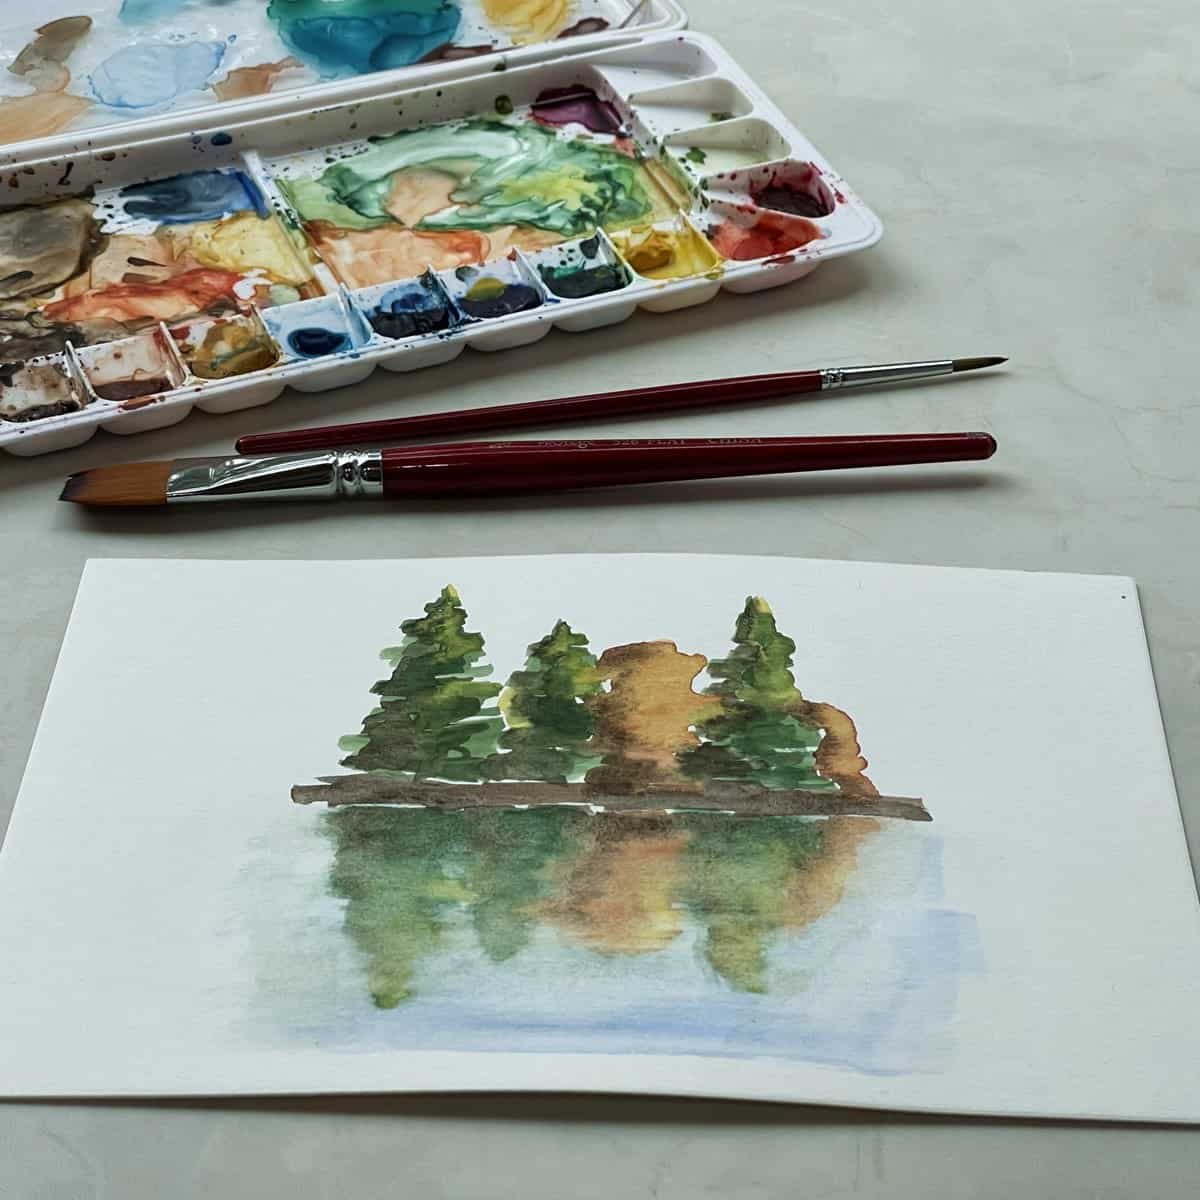 Watercolor painting of trees reflected on water next to paintbrushes and a watercolor paint set.